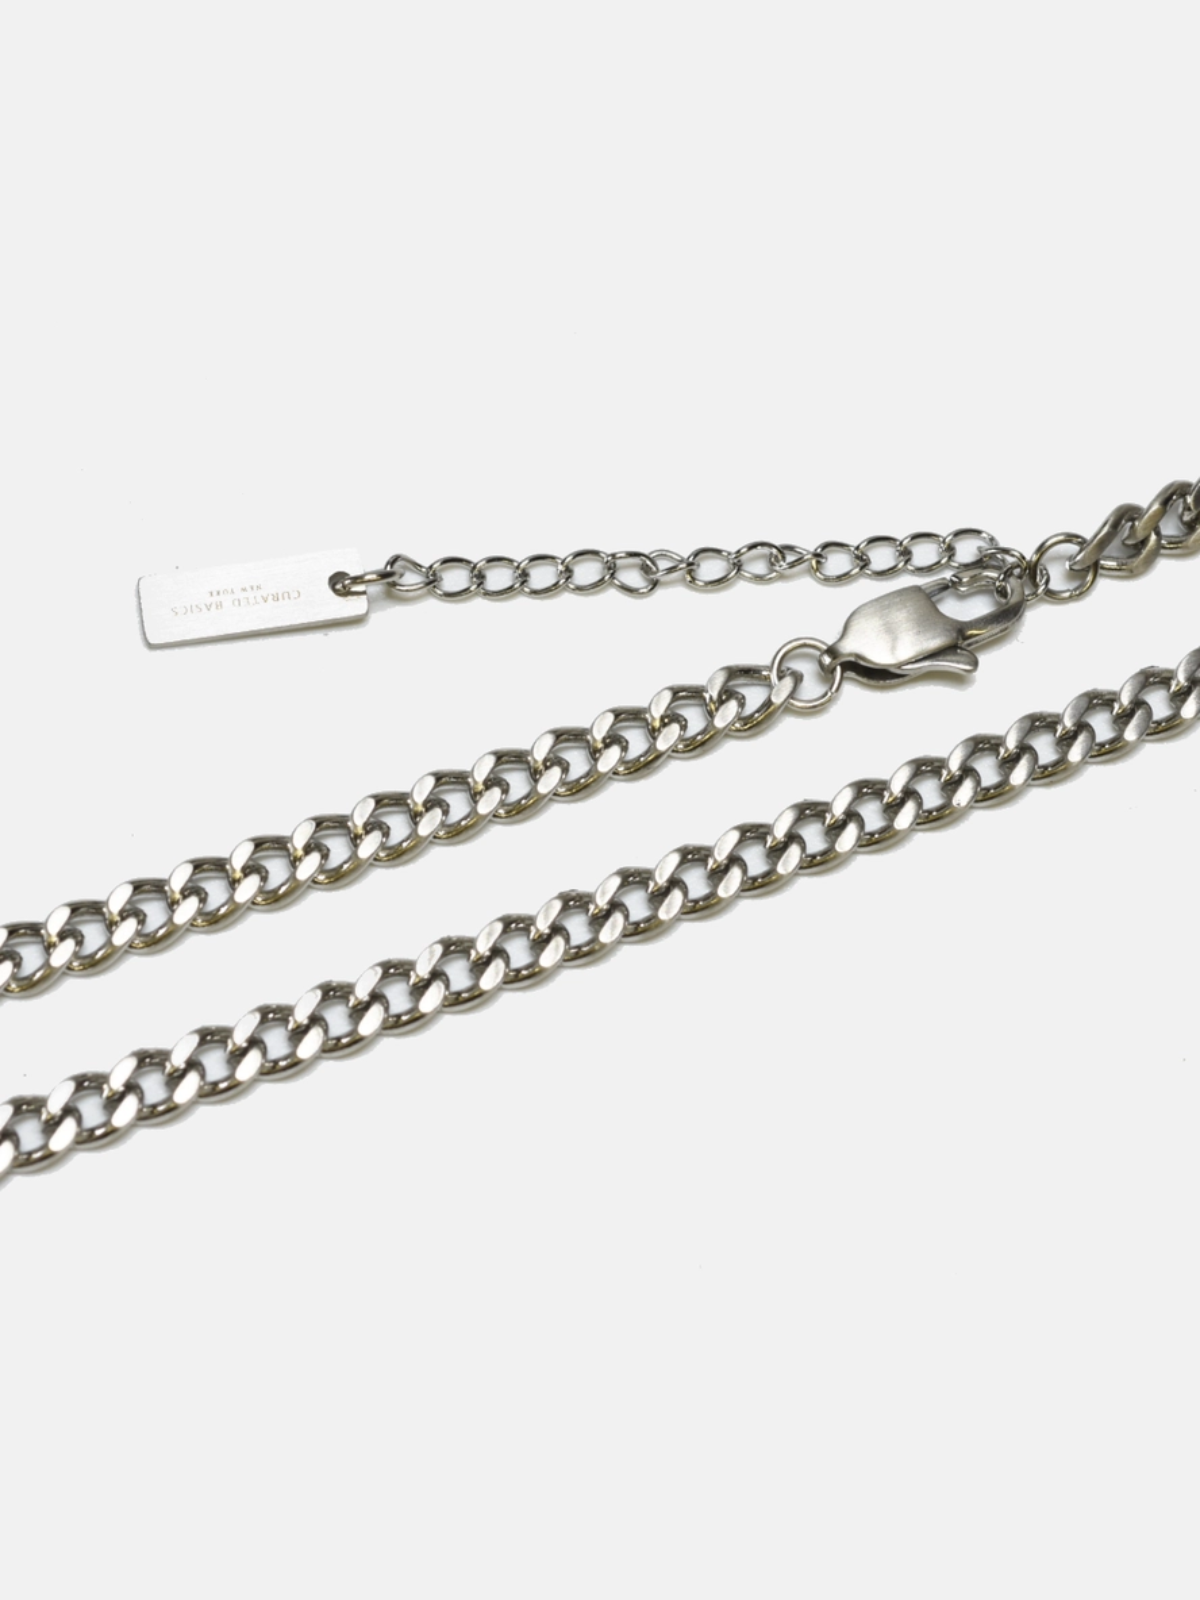 Curated Basics 5mm Steel Curb Chain Necklace for Men Kempt Athens Georgia Guys Accessories Shop